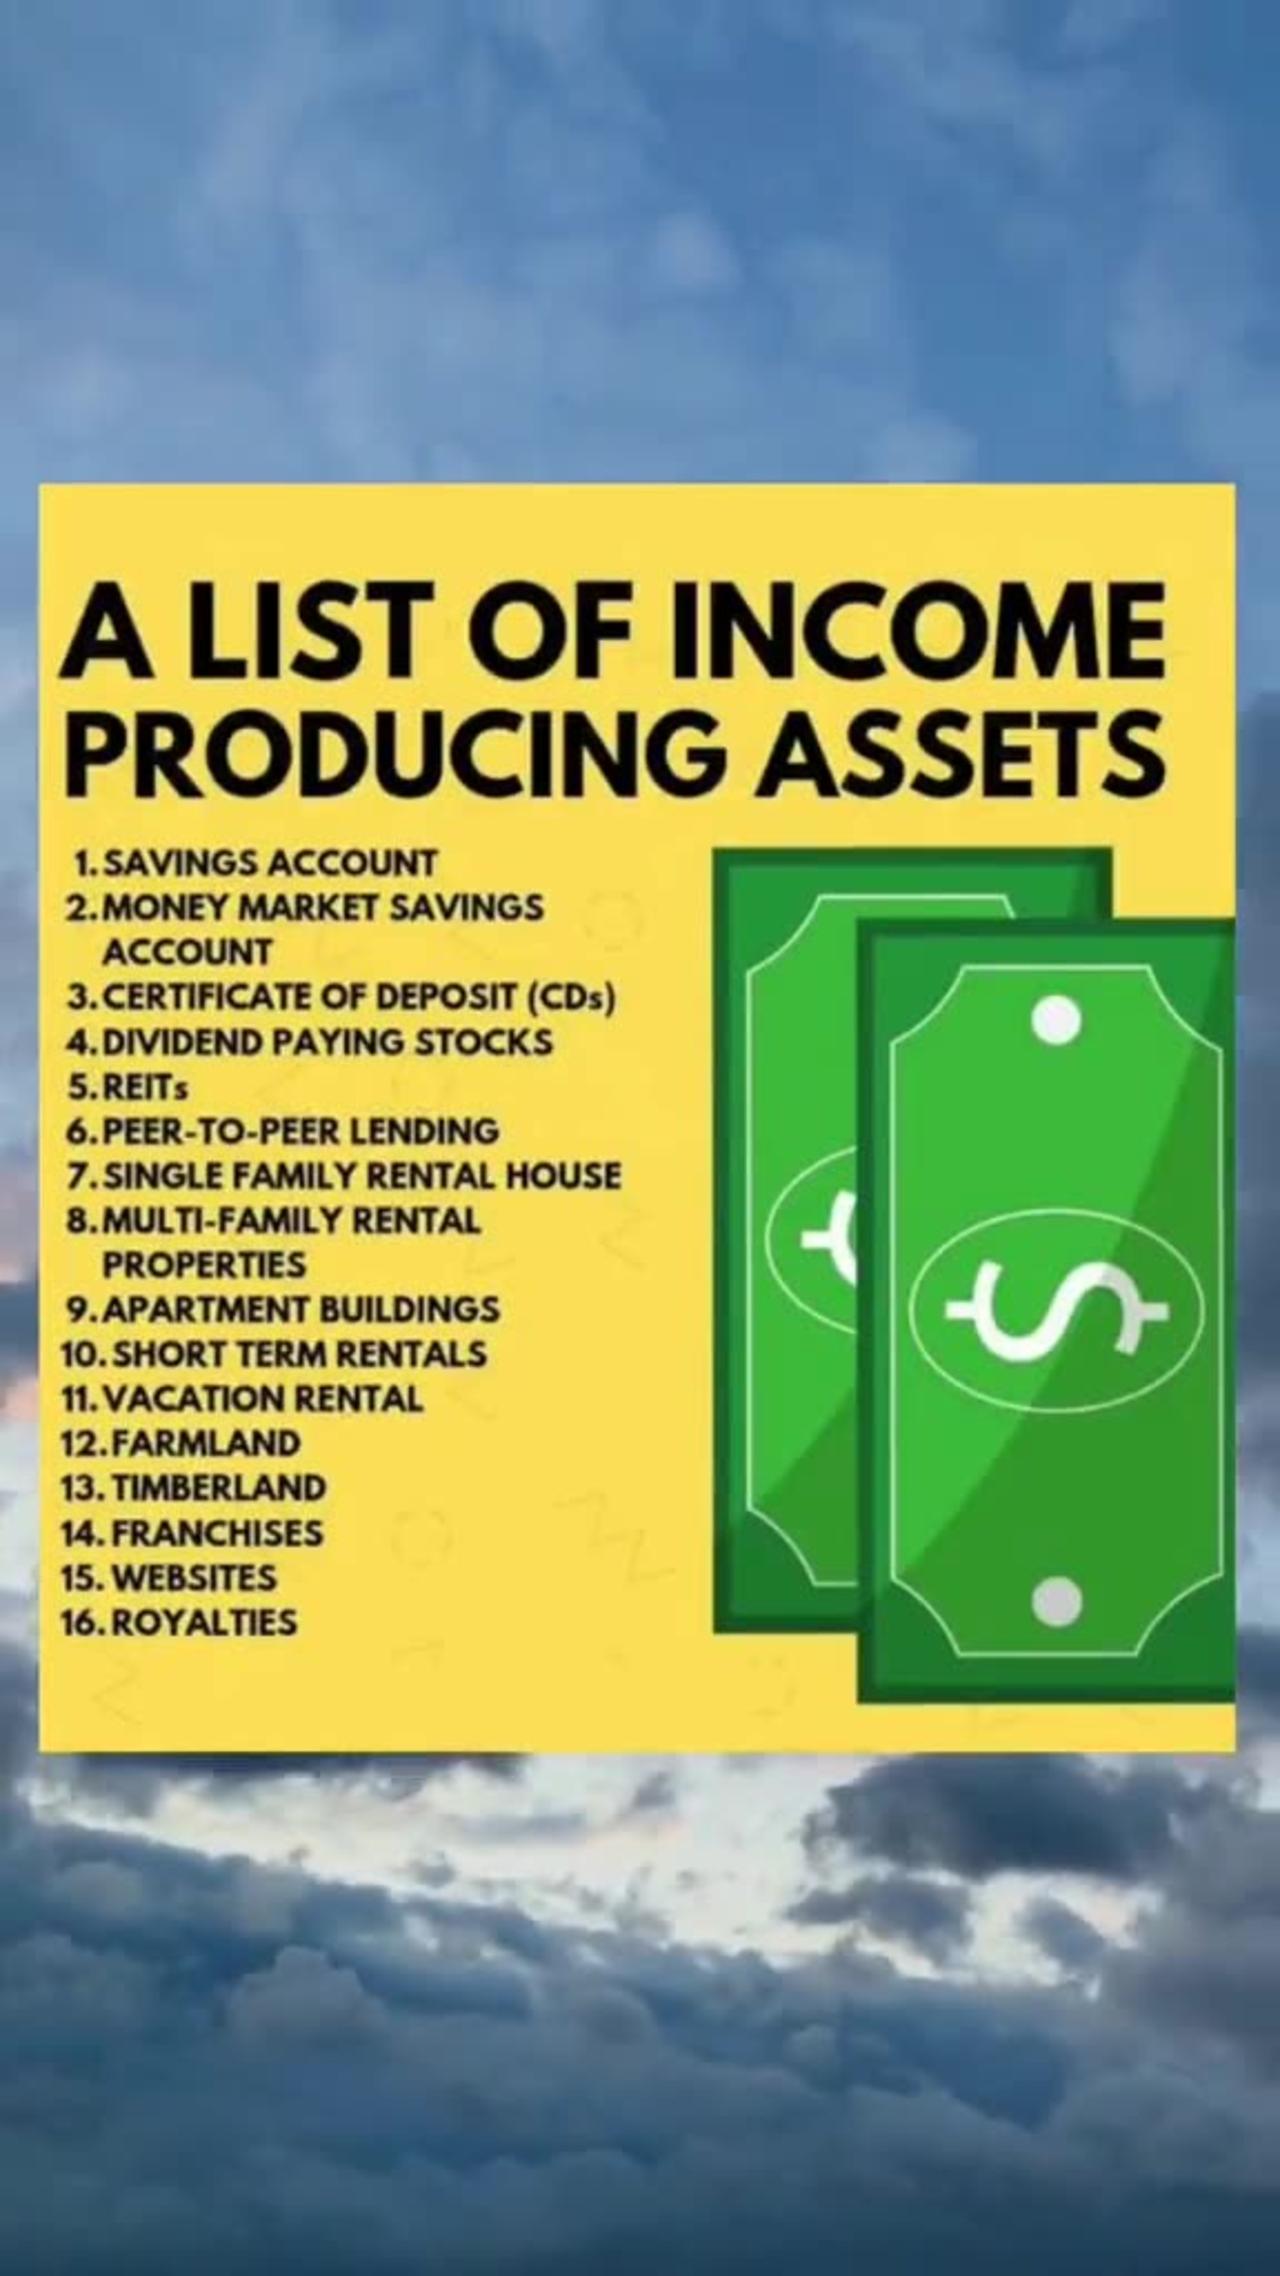 "16 Incredible Income-Producing Assets to Secure Your Financial Future"